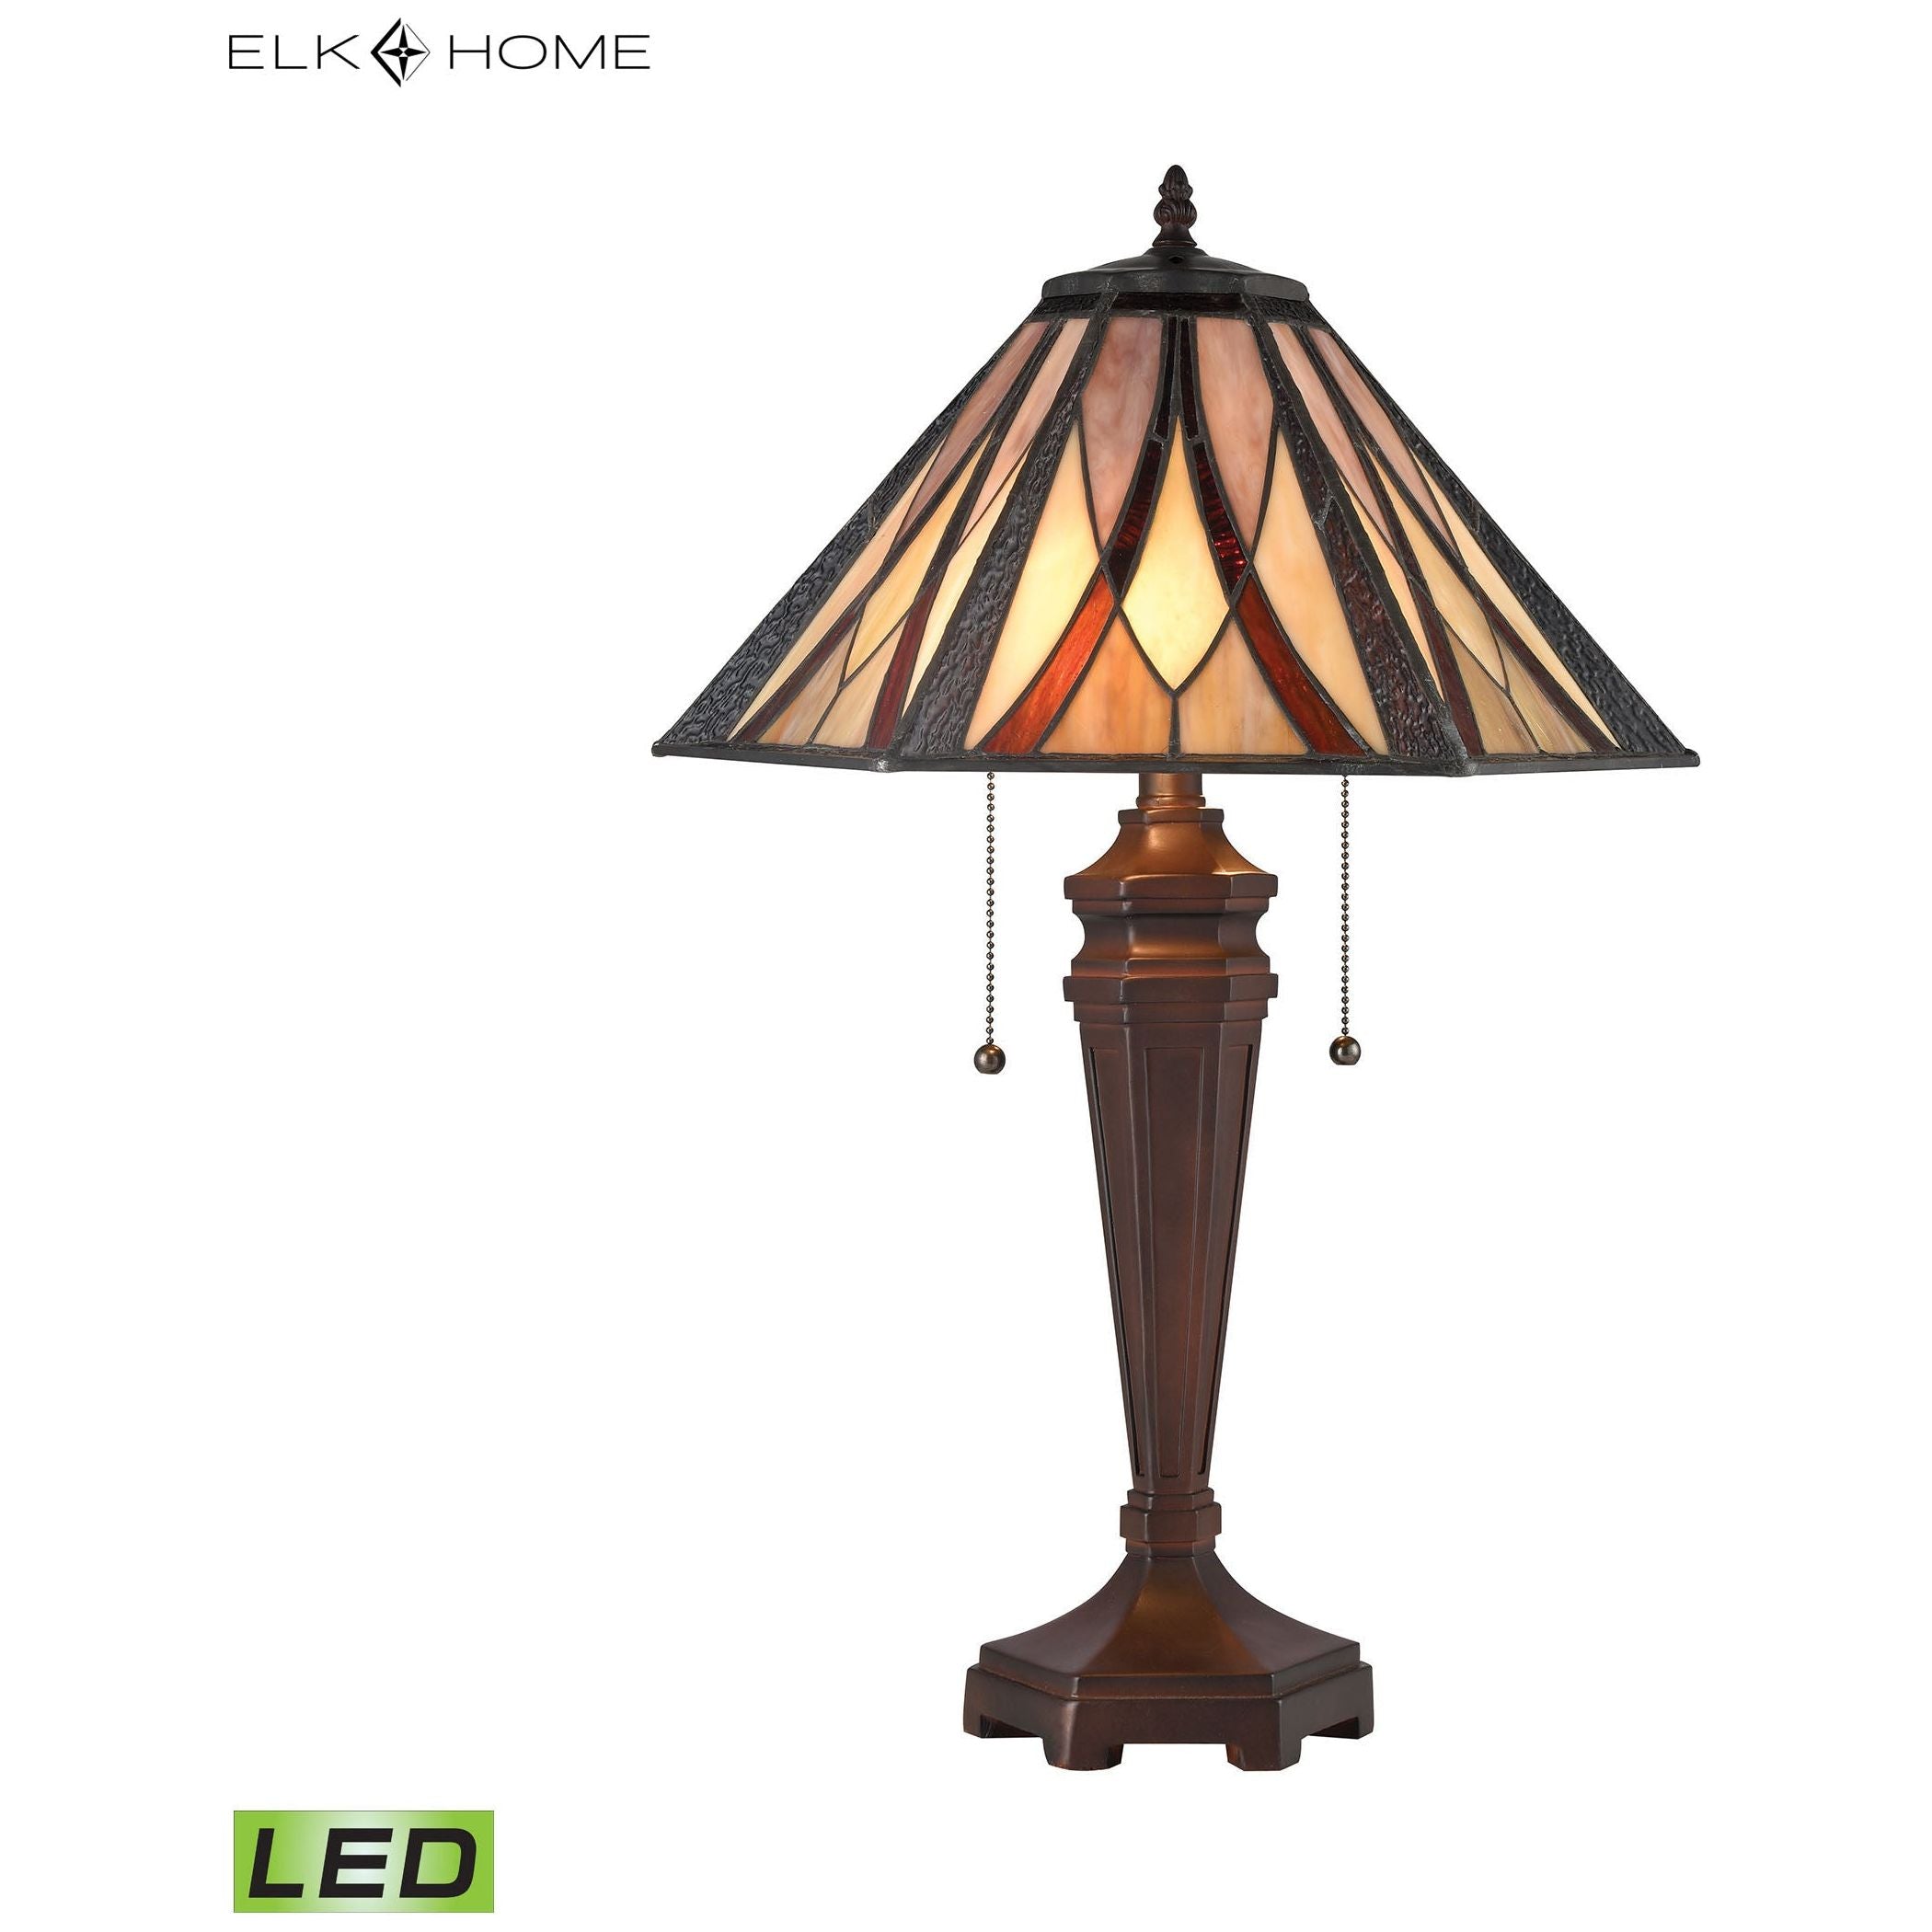 Foursquare 24" High 2-Light Table Lamp